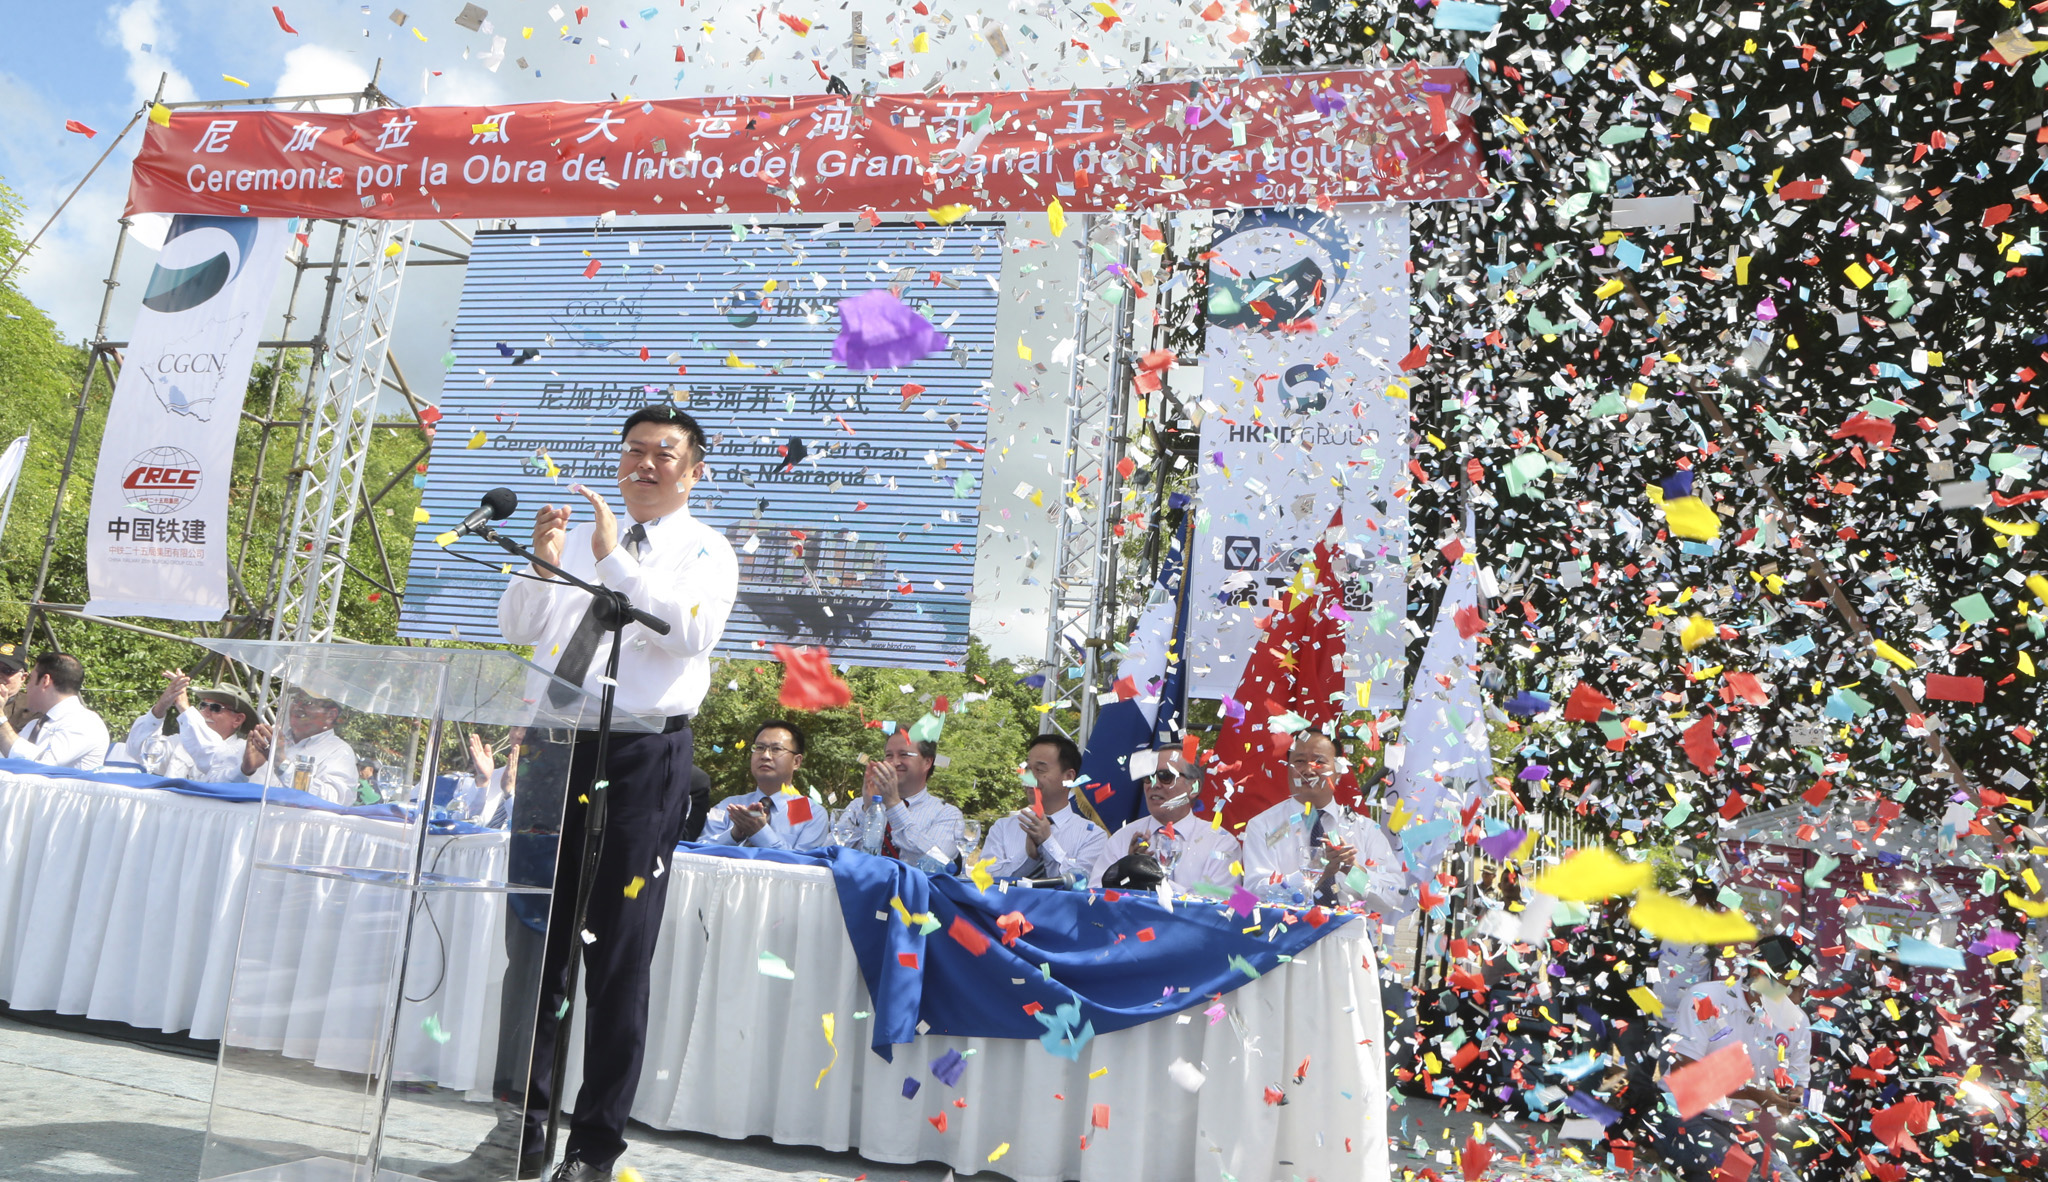 HKND Group Chairman Wang Jing speaks during the start of the first works of the Interoceanic Grand Canal in Brito town